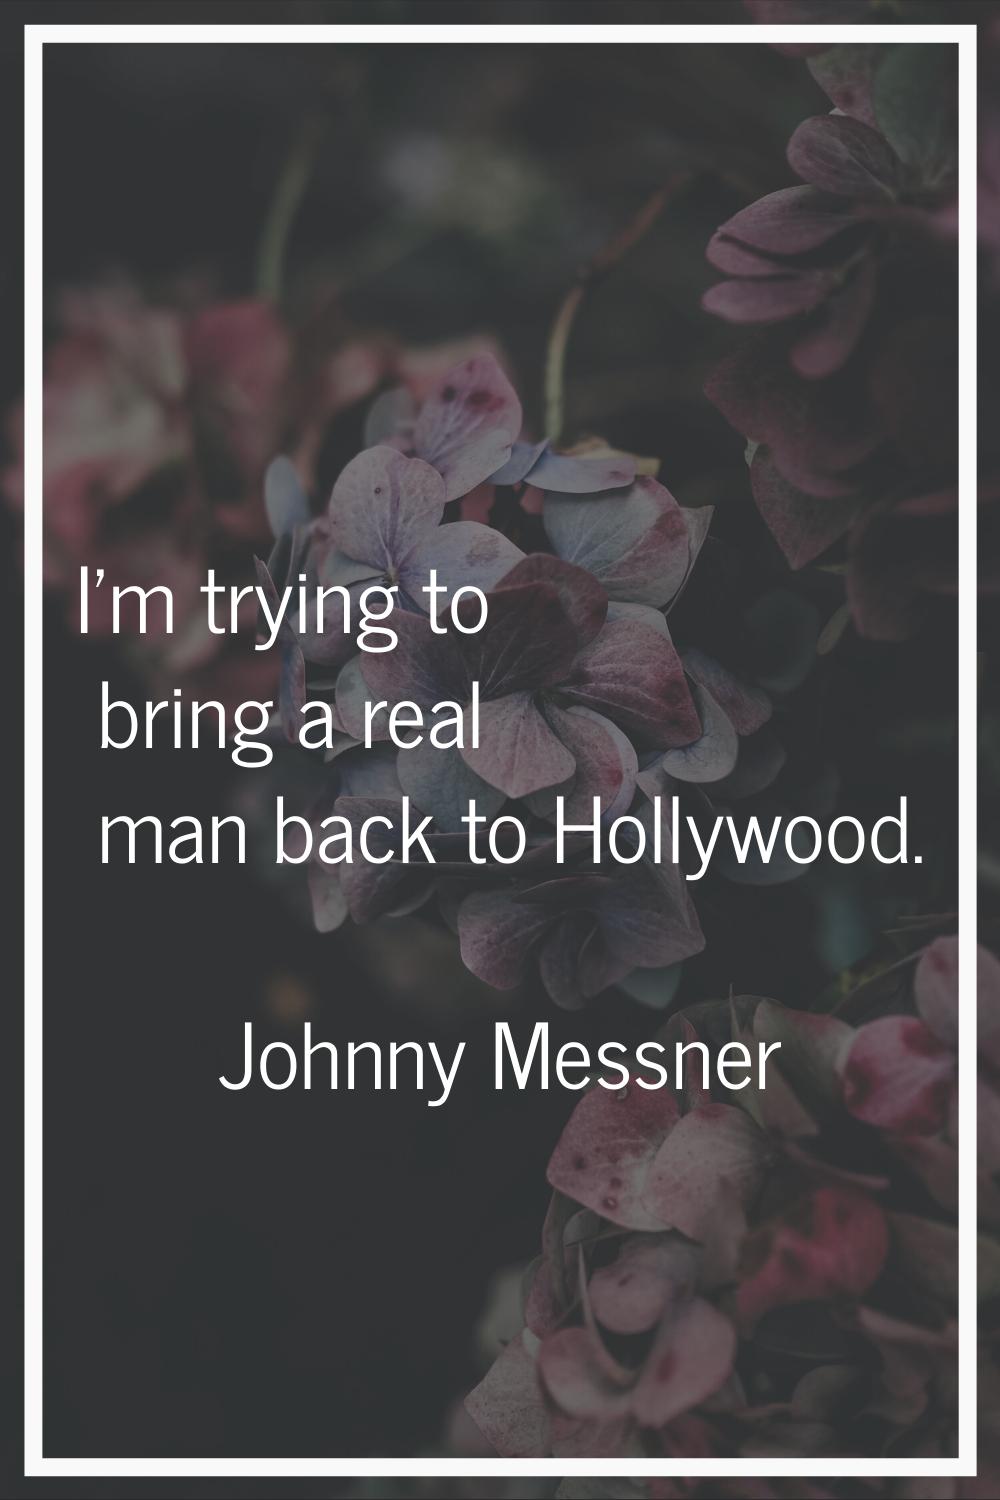 I'm trying to bring a real man back to Hollywood.